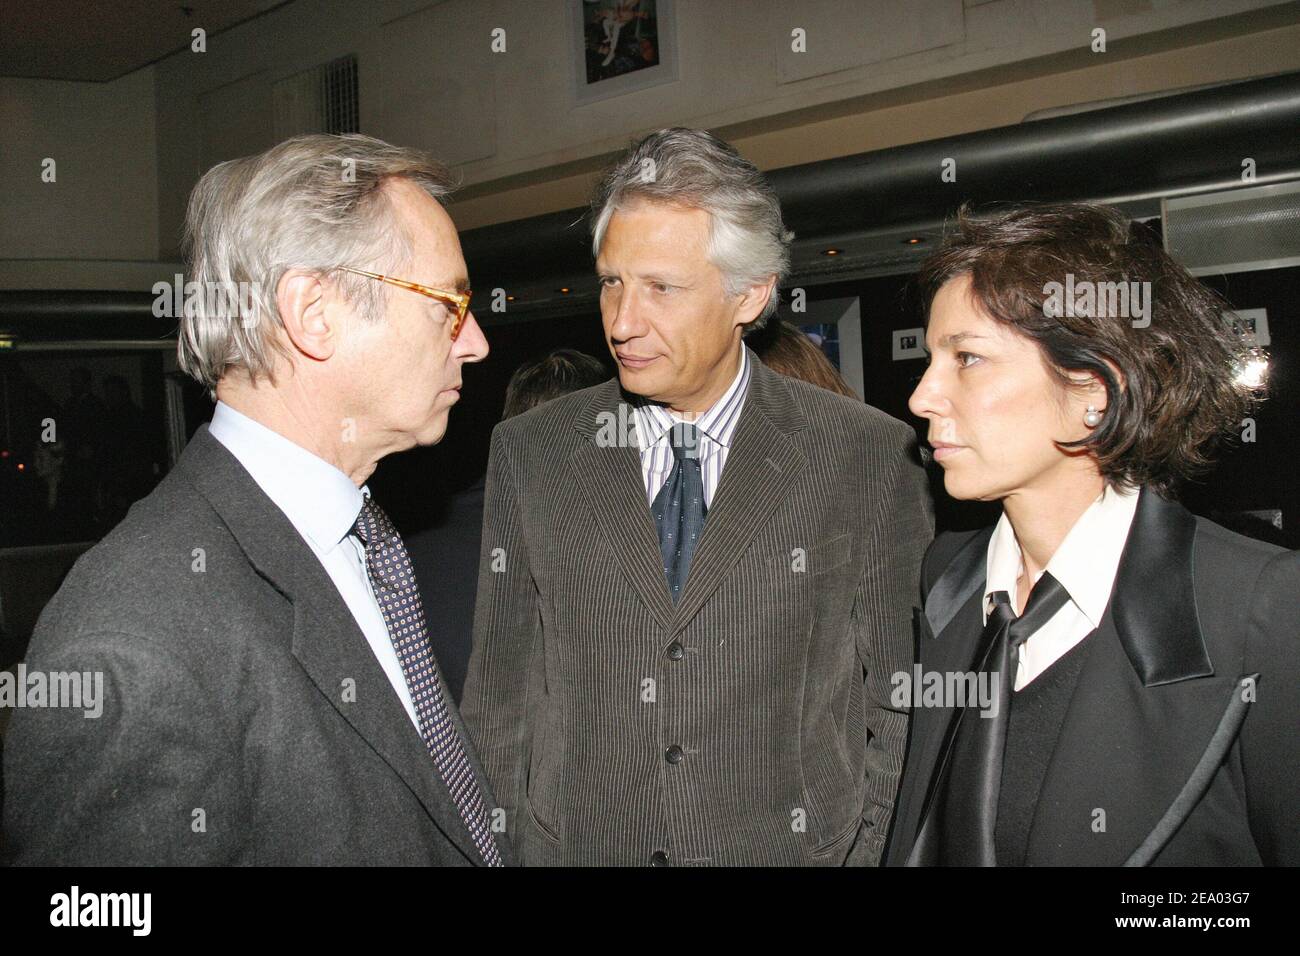 French Interior Minister Dominique de Villepin (C) with editor Olivier Orban and his wife, author Christine Orban attend the Cellboost party for mobile phone accessories organized by Worldline Communications at the VIP Room in Paris, France, on February 17, 2005. Photo by Benoit Pinguet/ABACA. Stock Photo